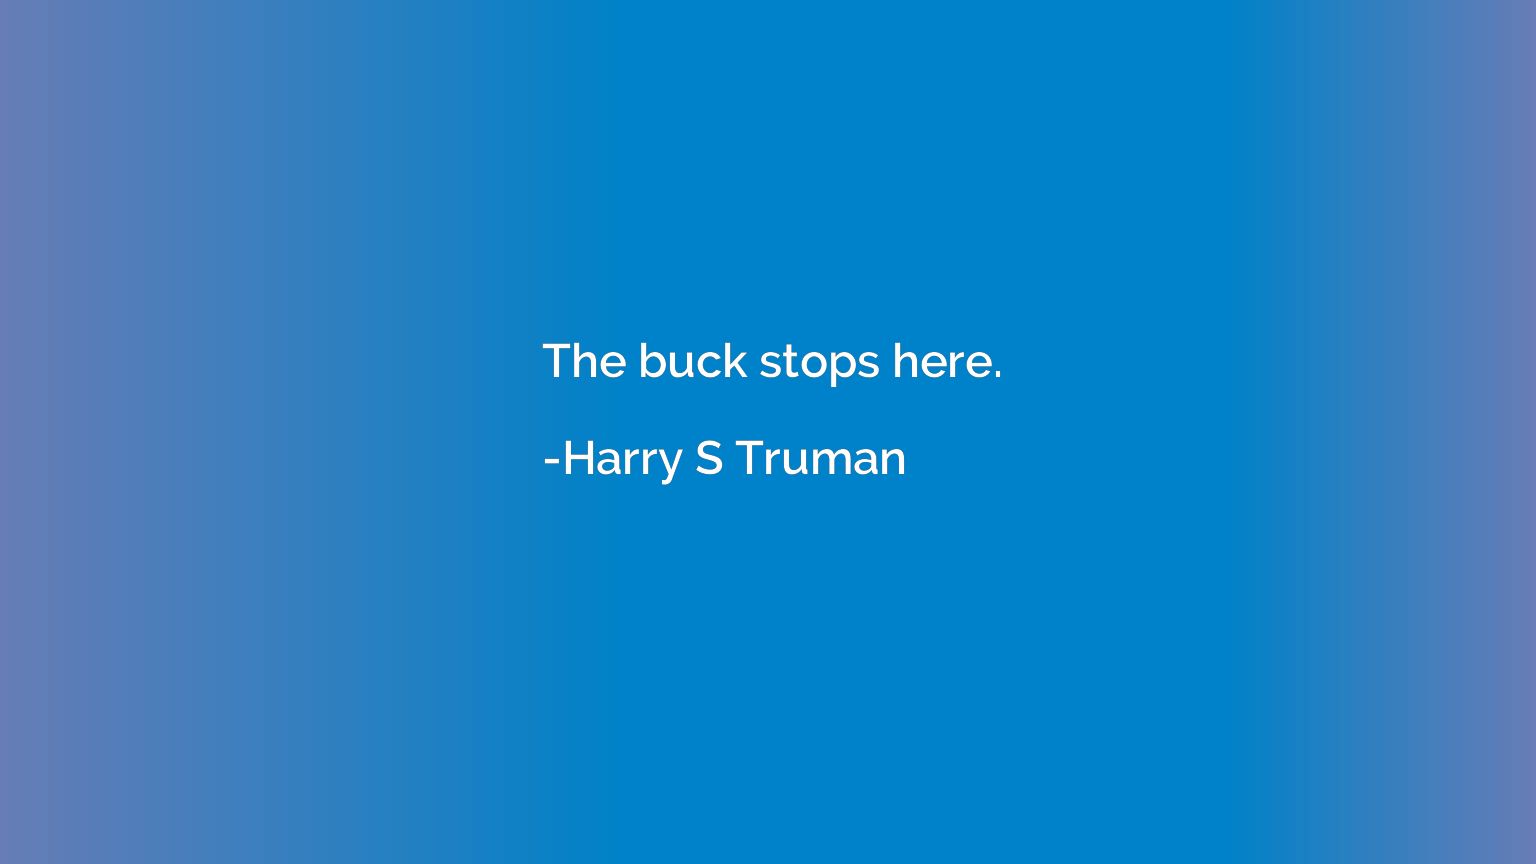 The buck stops here.